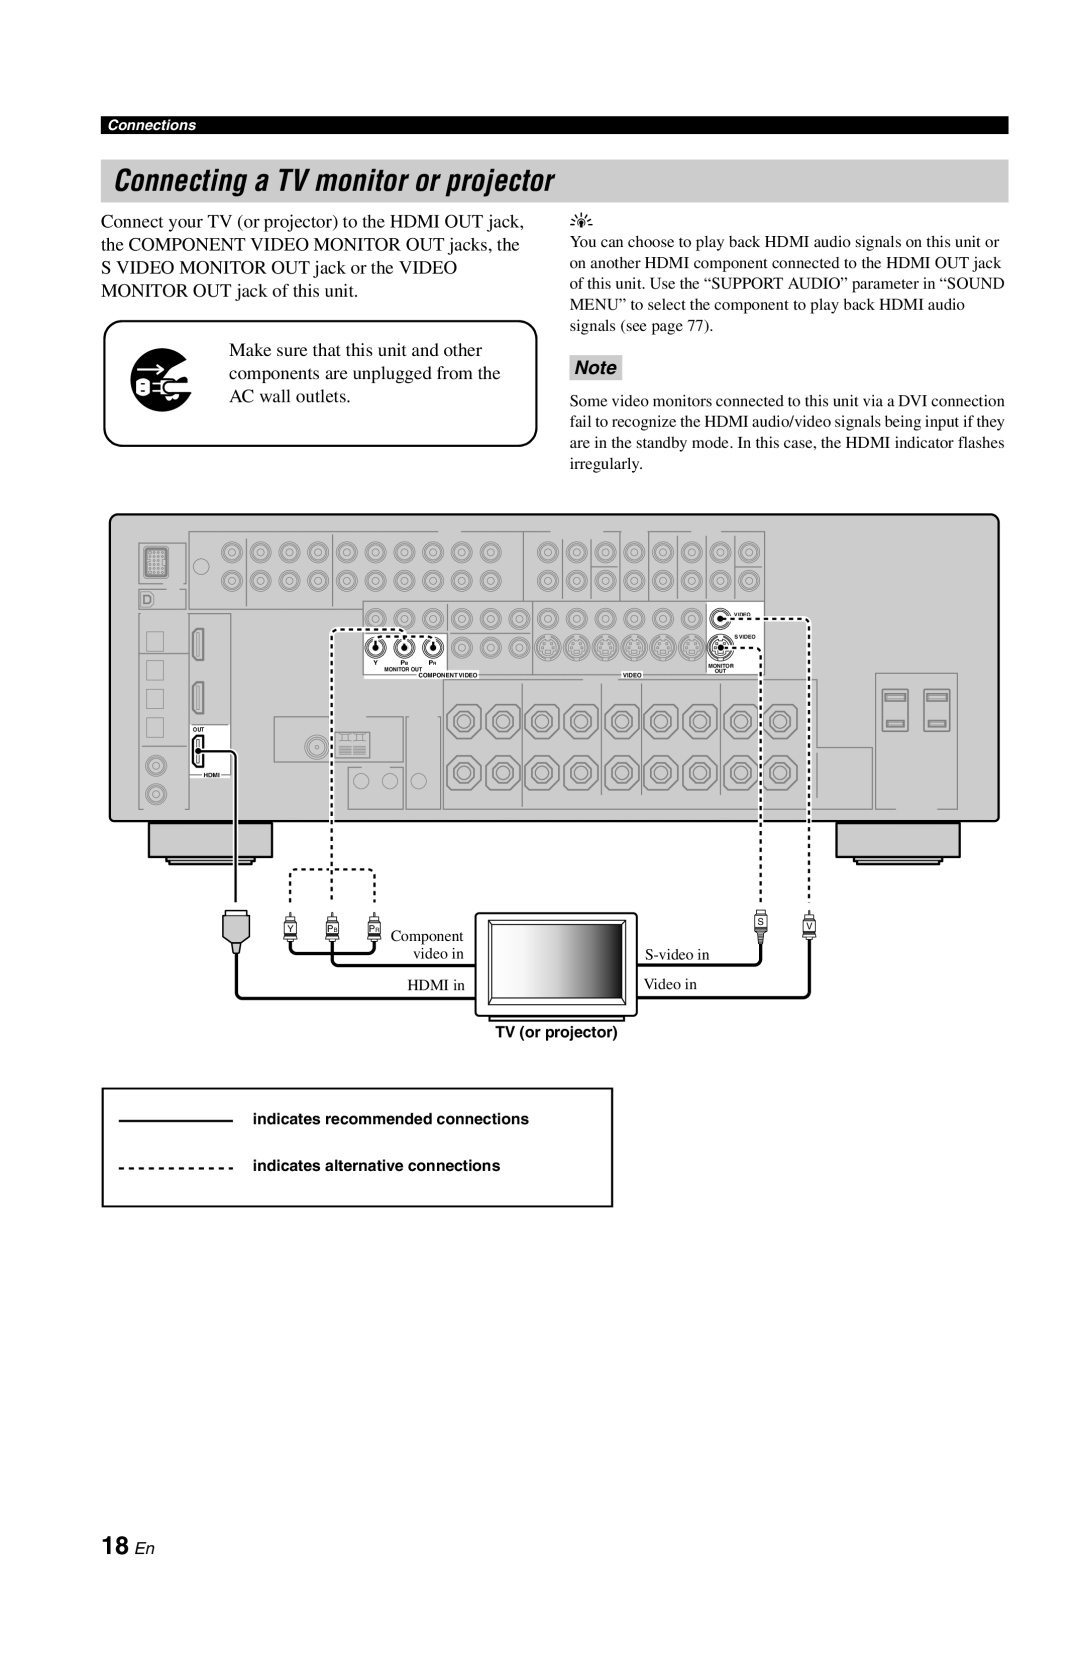 Yamaha RX-V861 owner manual Connecting a TV monitor or projector, 18 En 